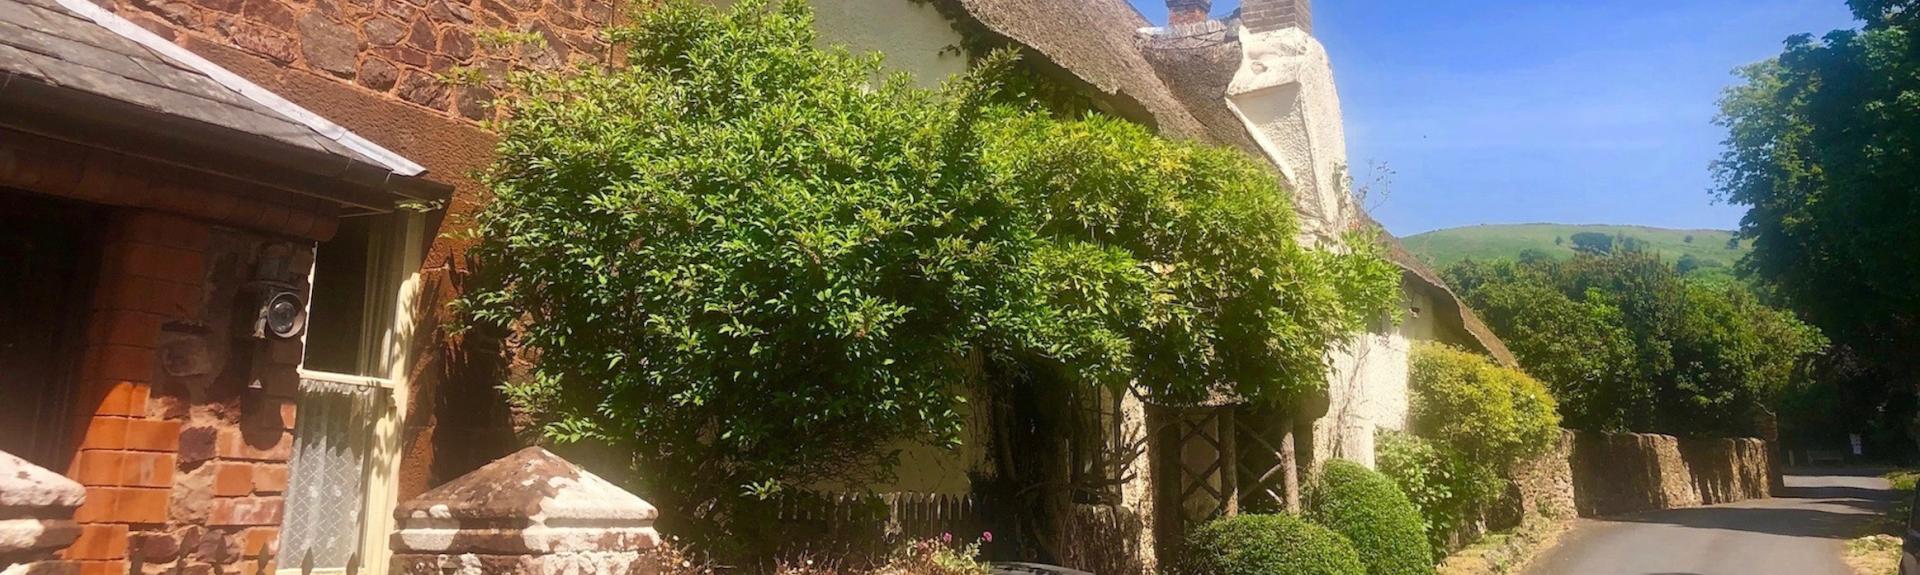 Wisteria-clad Quantock holiday cottages on a village street on a sunny day.